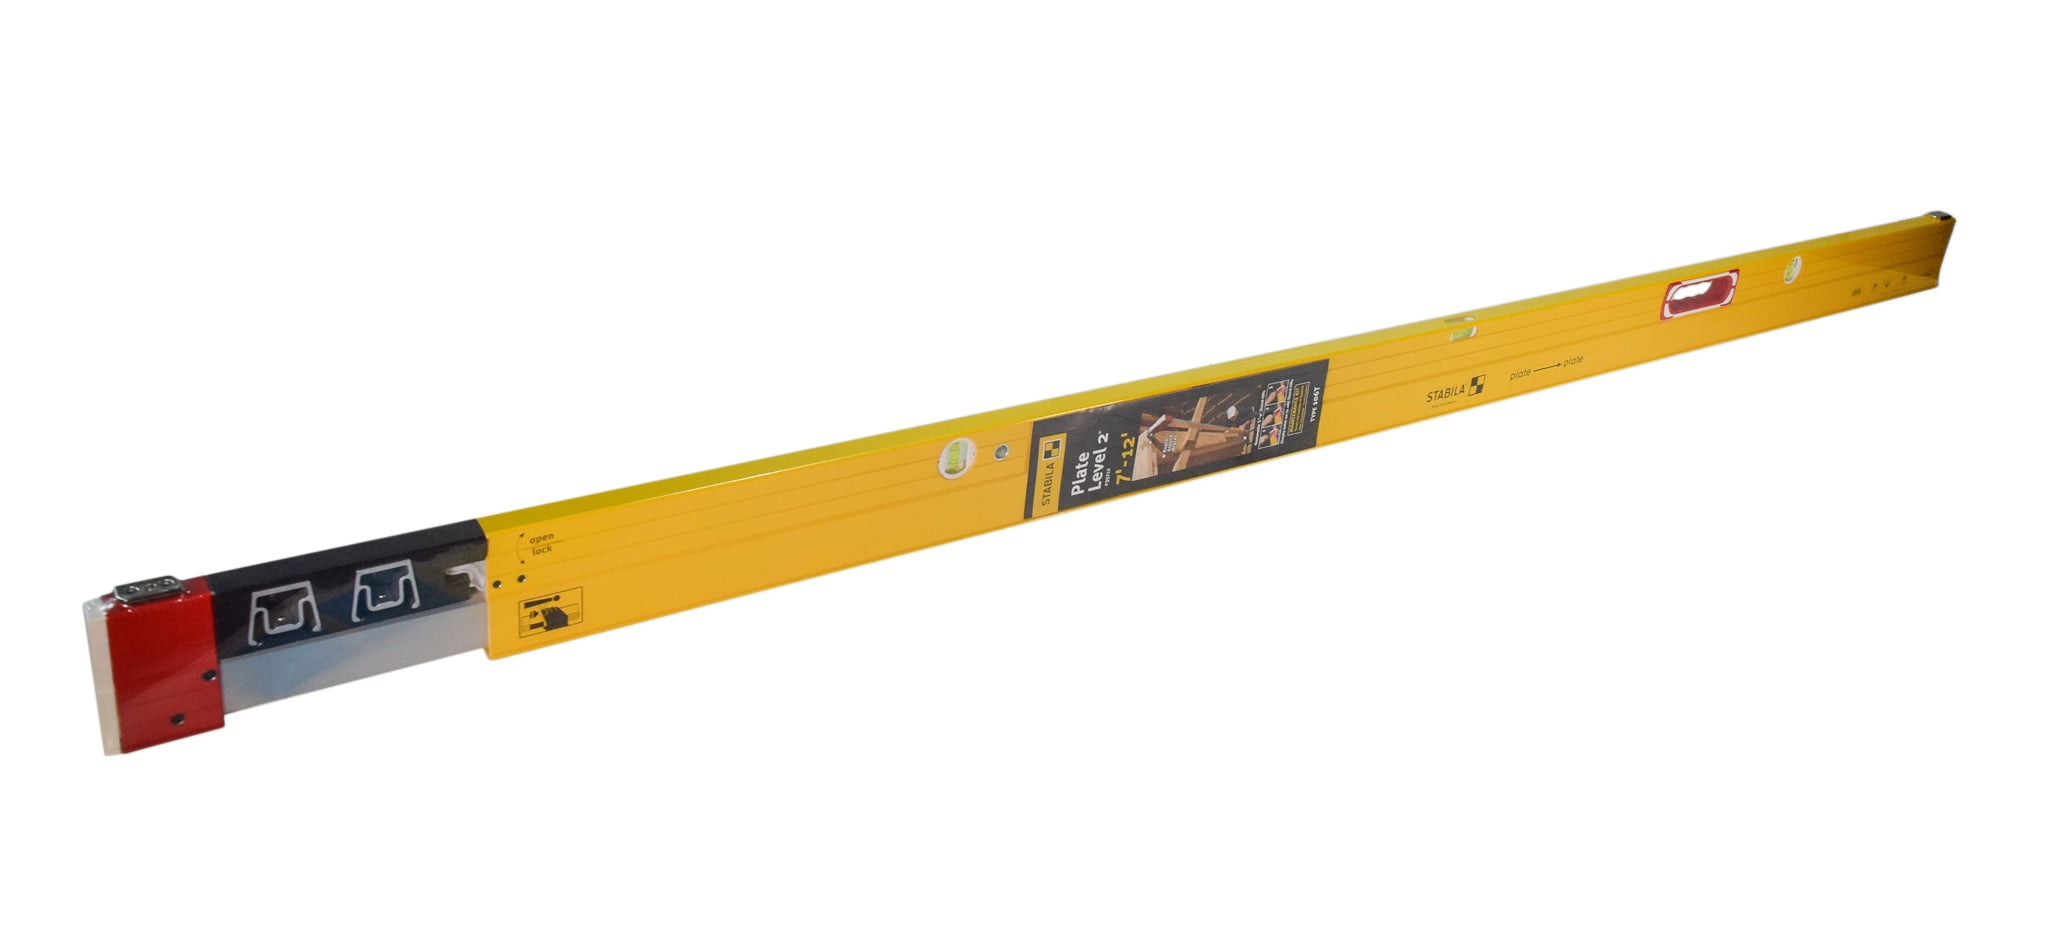 Stabila-35712-Type-106T-84-Inch-Extendable-Plate-Level-with-Hang-Hole-image-3